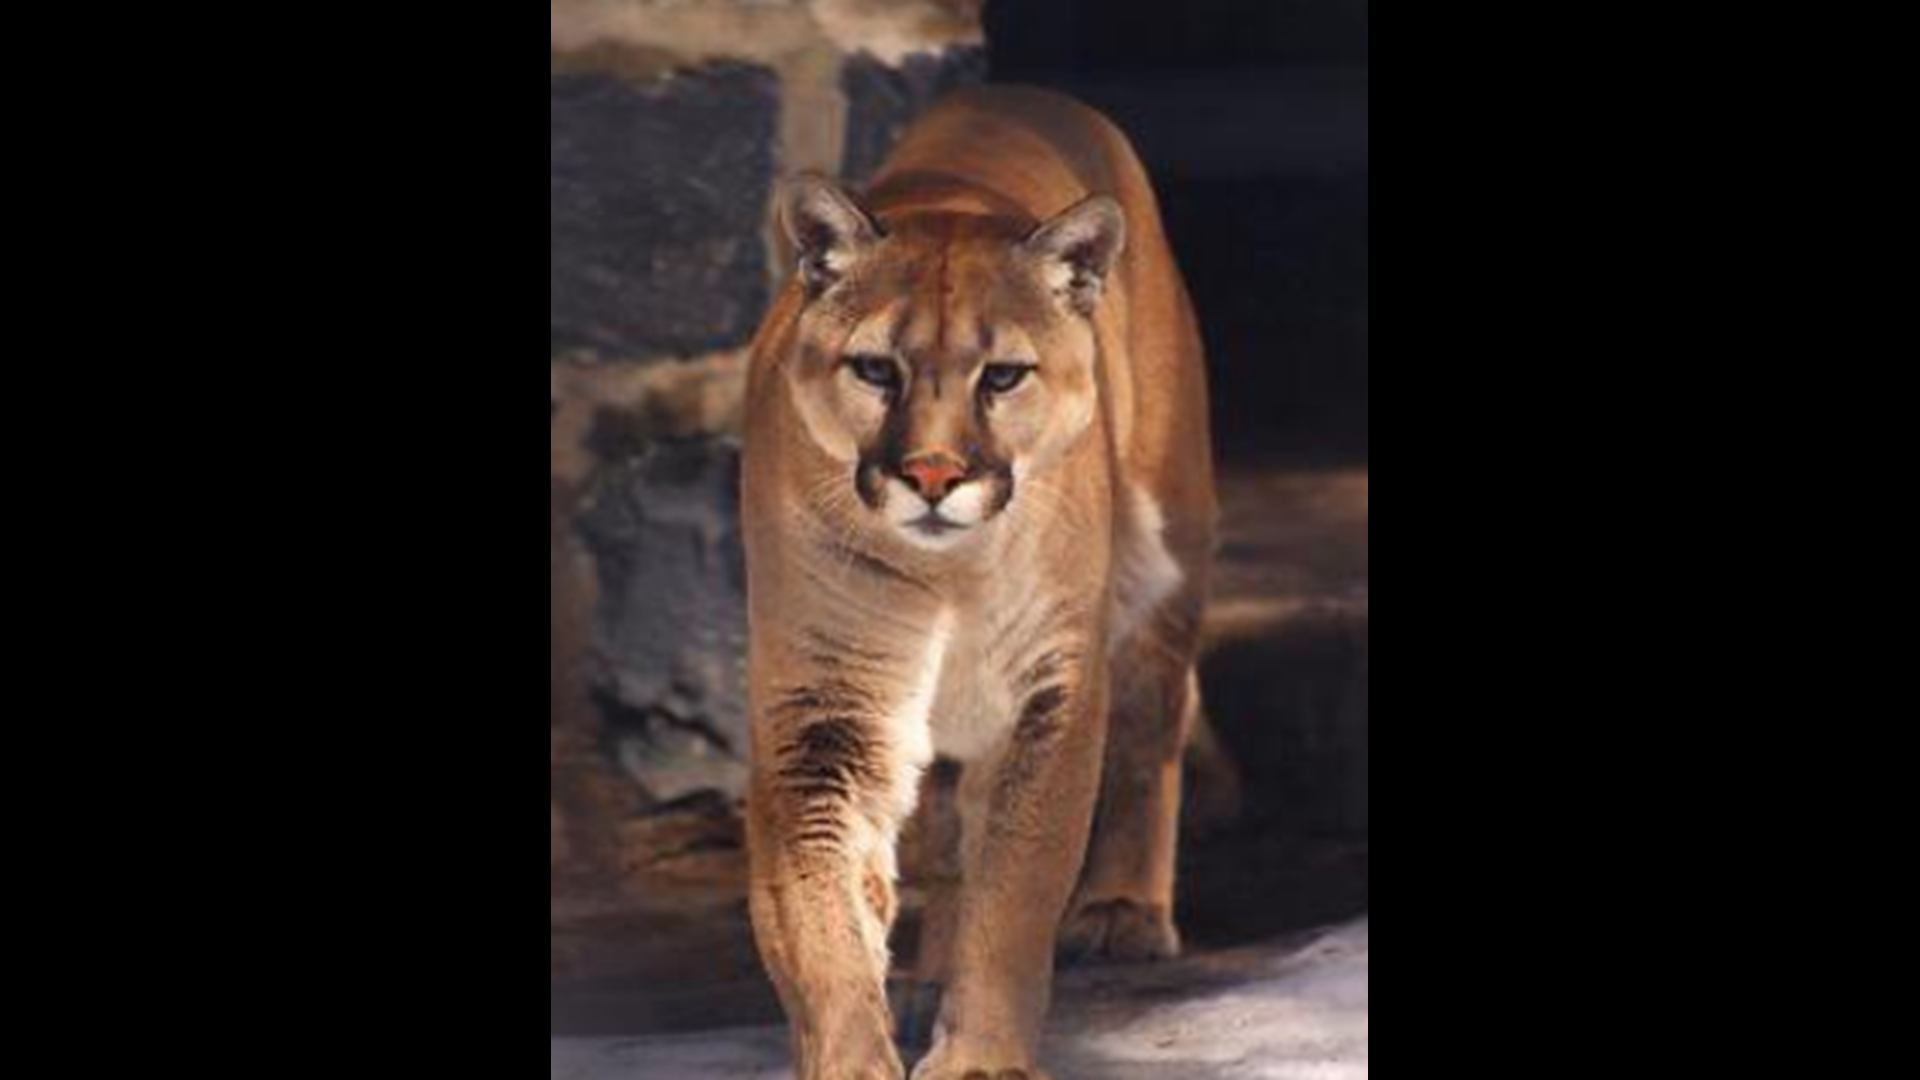 How rare are mountain lion sightings in Iowa?